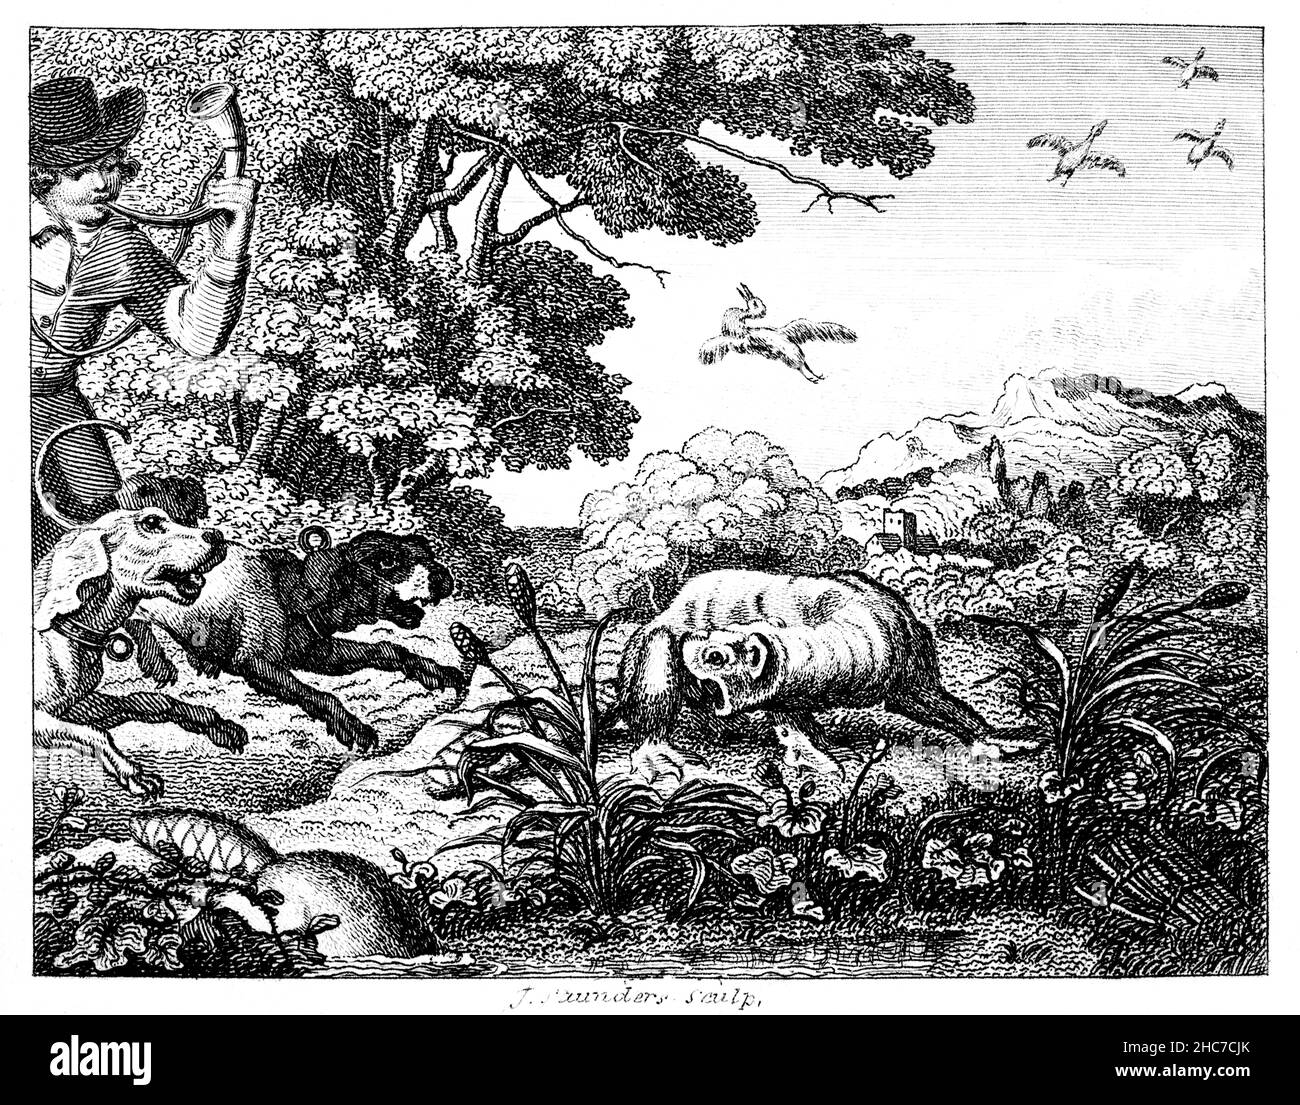 engraved illustration of The Hunted Beaver, with the moral, jettison what causes danger, from 1793 First Edition of Stockdale’s Aesop’s Fables Stock Photo